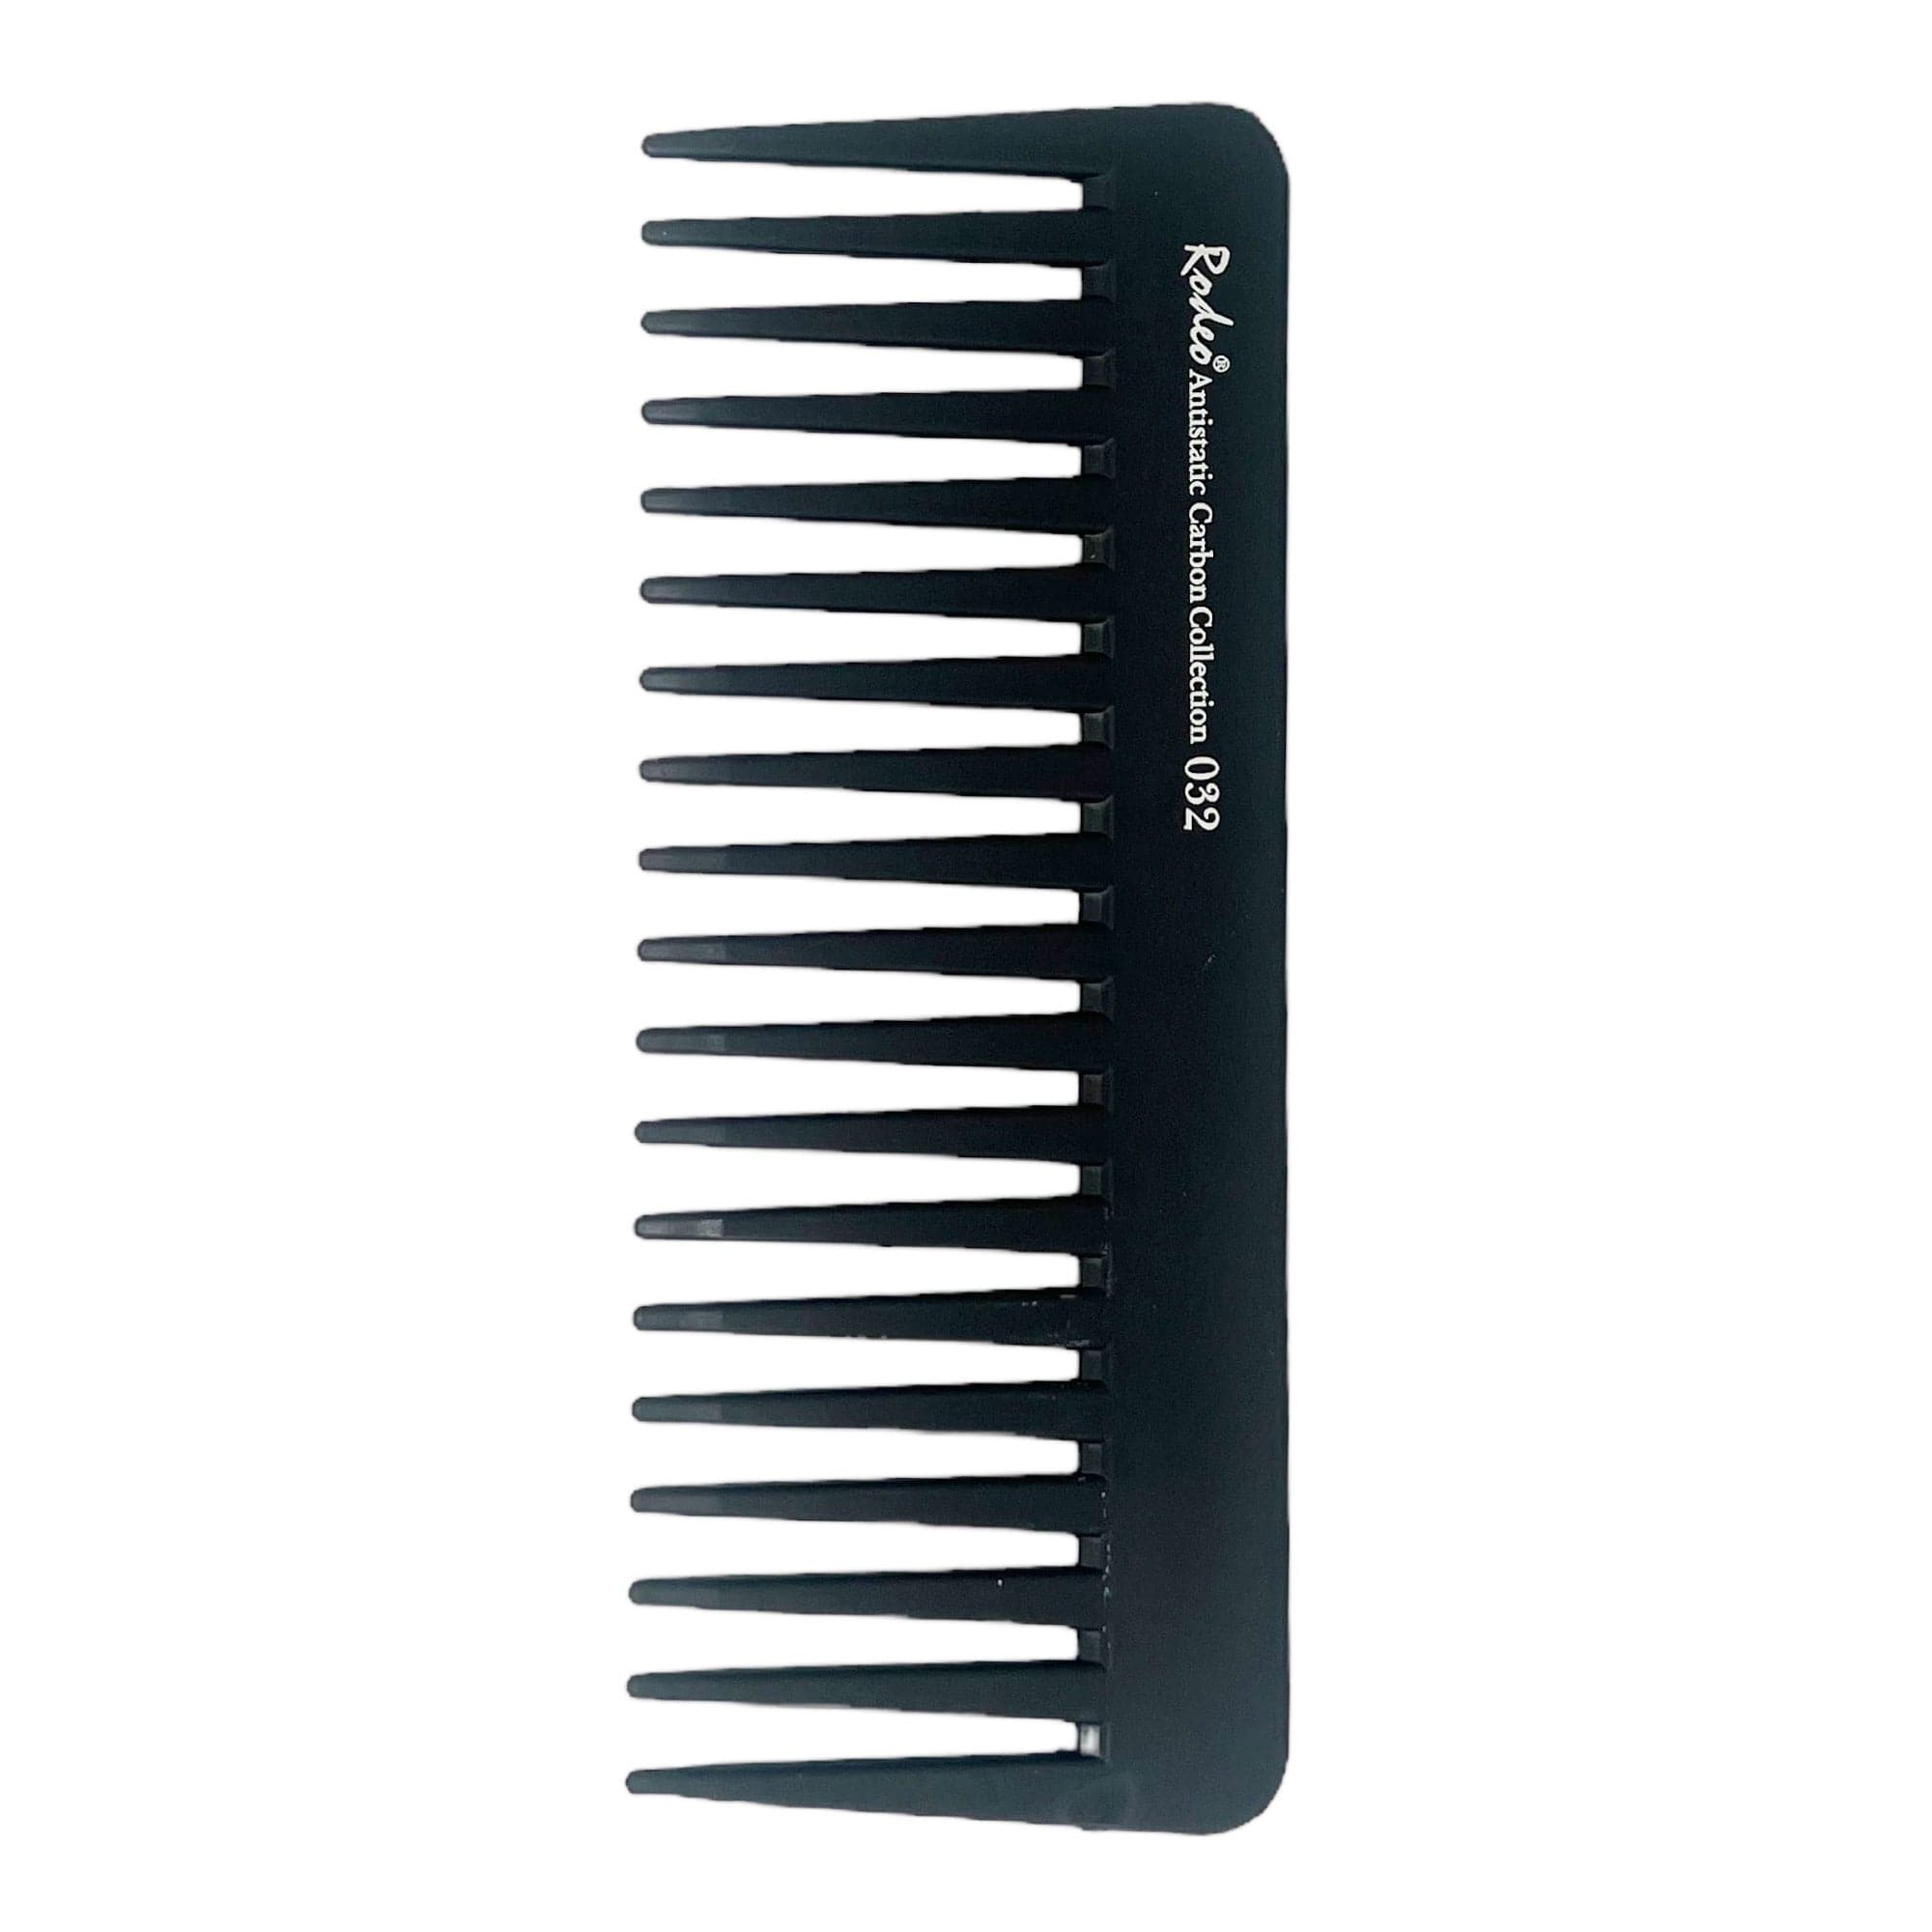 Rodeo - Styling Comb Wide Tooth No.032 16cm